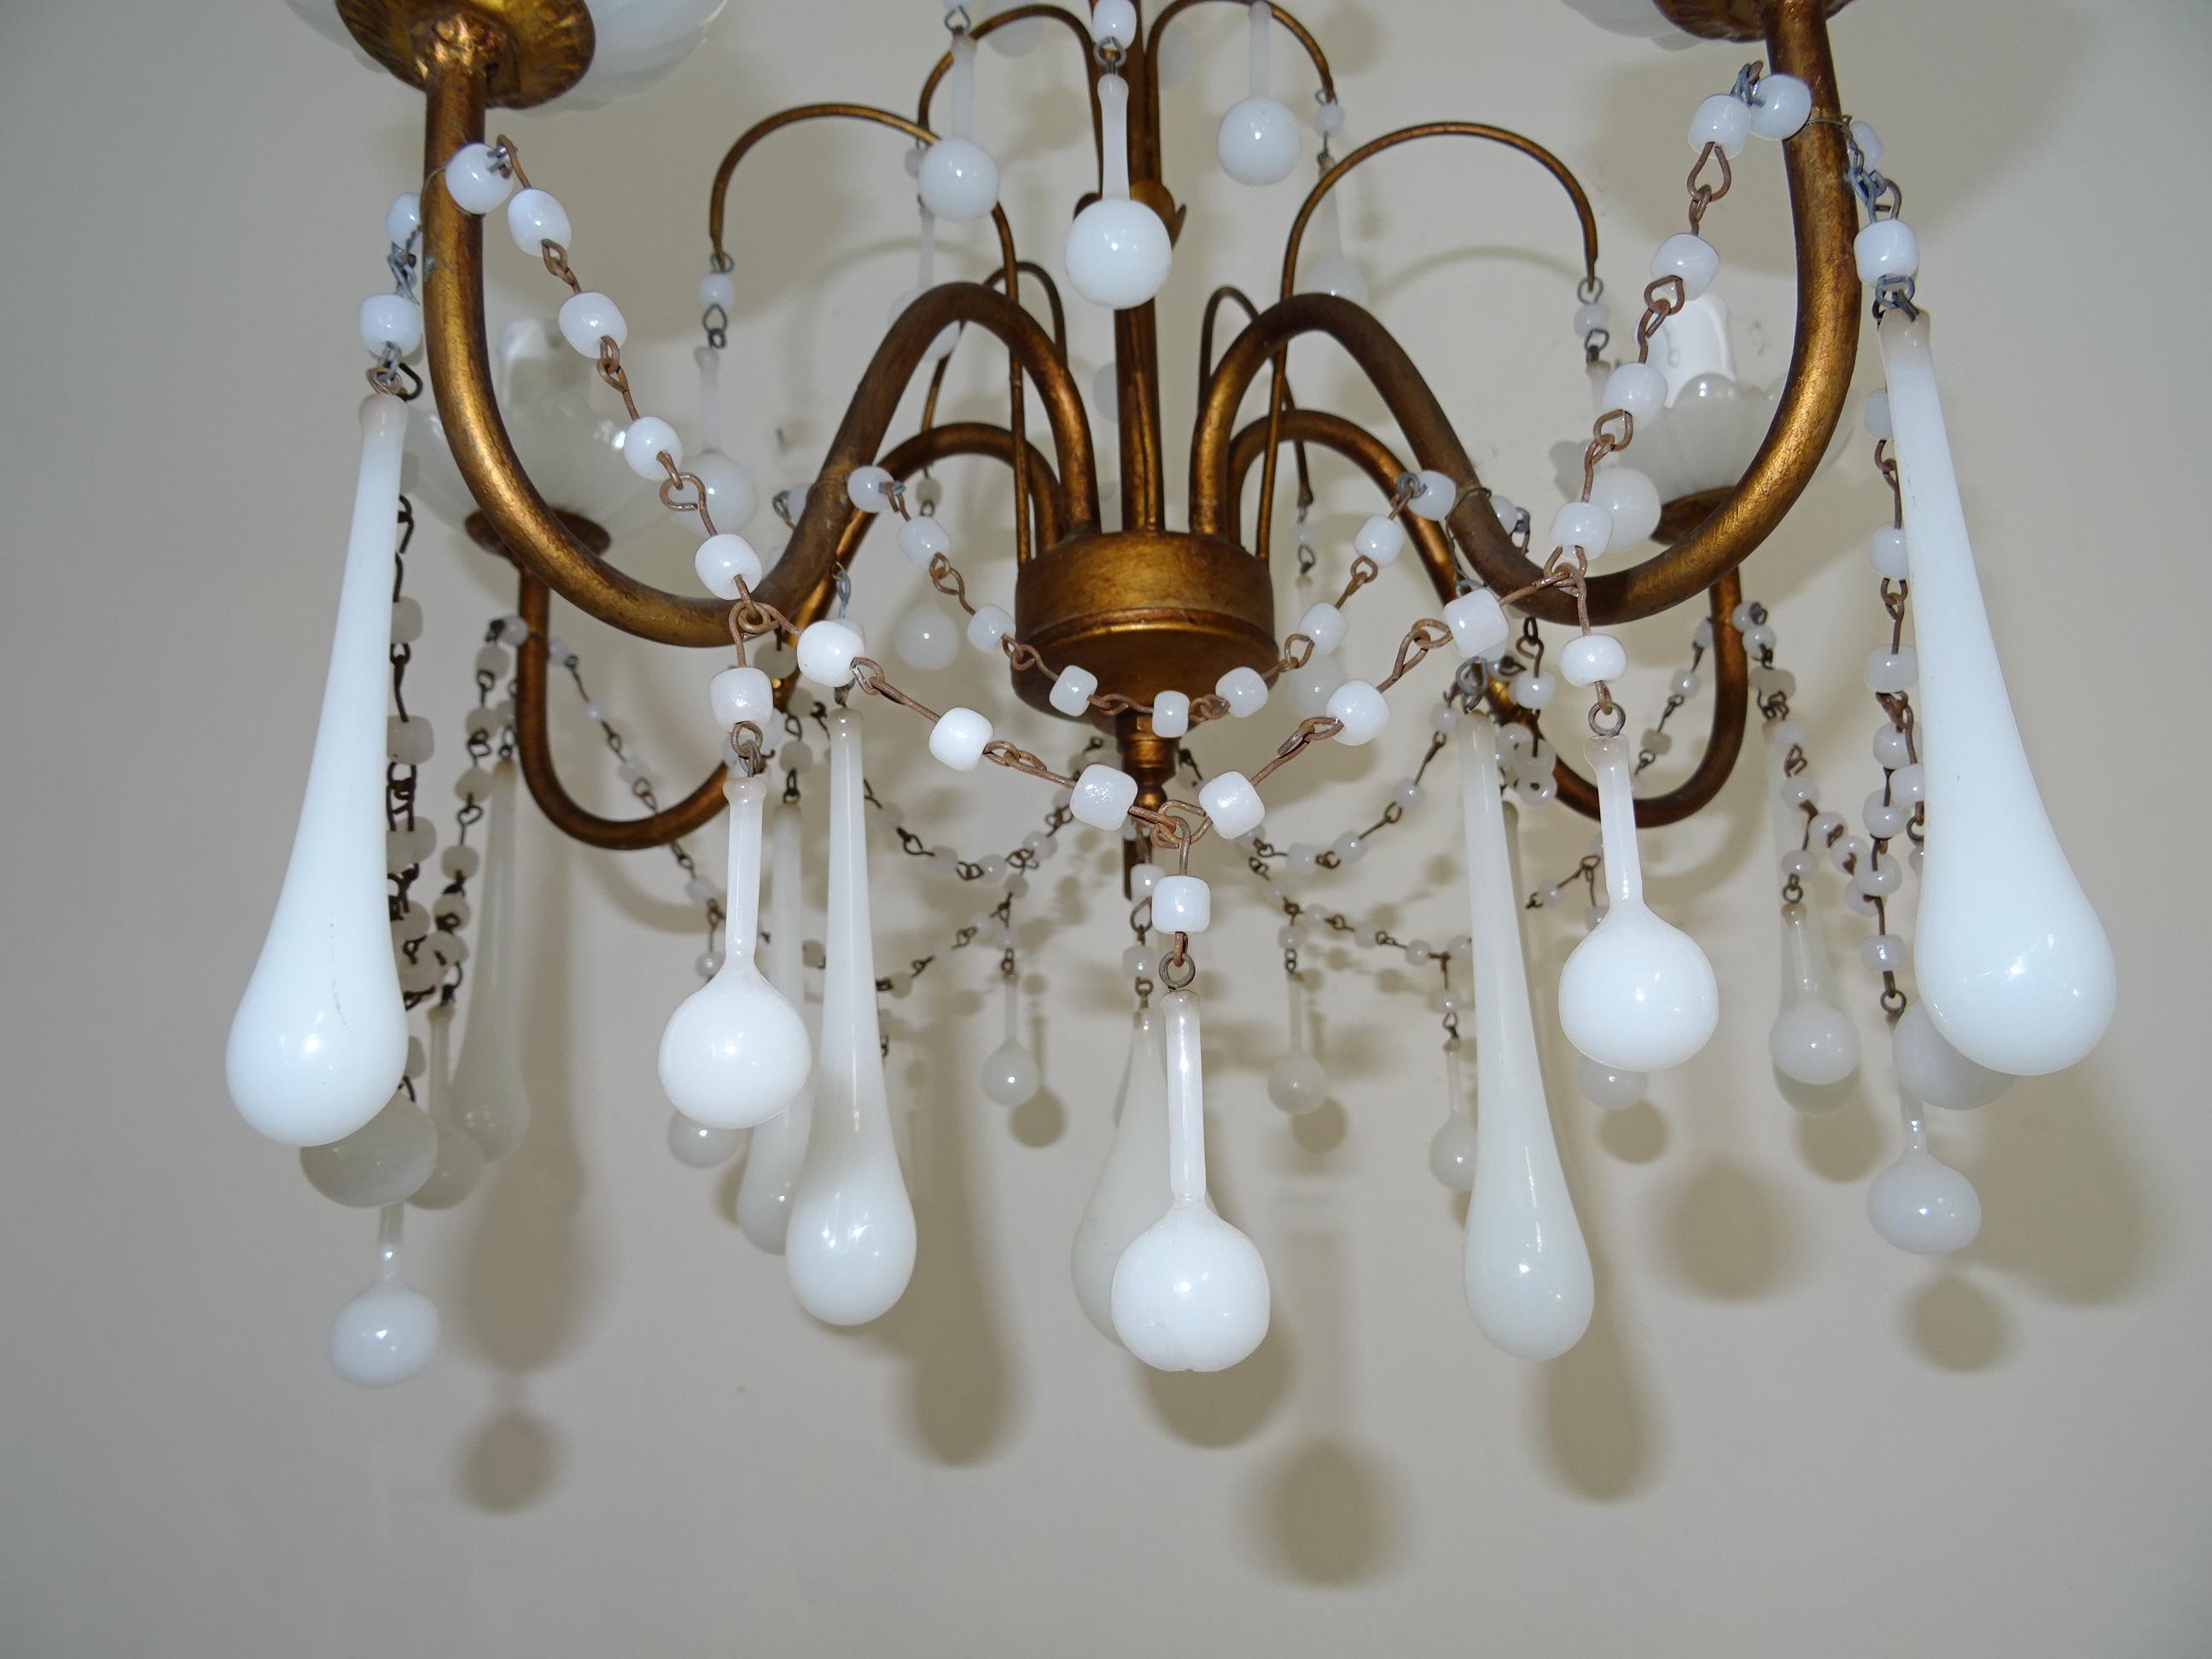 1930 French White Opaline Bobeches, Beads and Drops Chandelier For Sale 3